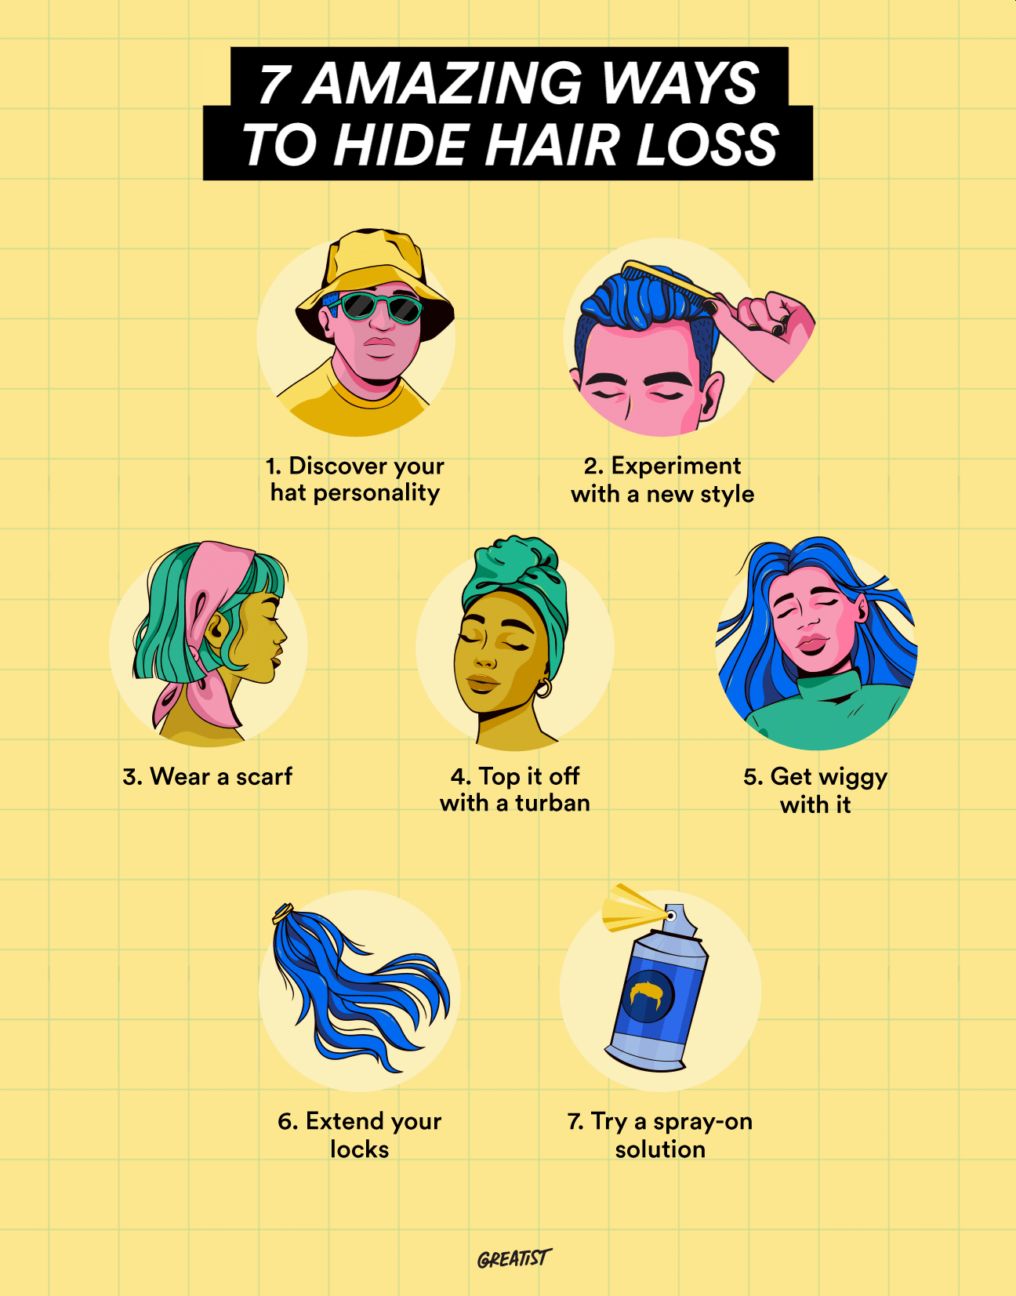 infographic showing 7 amazing ways to hide hair loss; tips include hats, hairstyles, scarves, turbans, wigs, extensions, and spray-on solutions